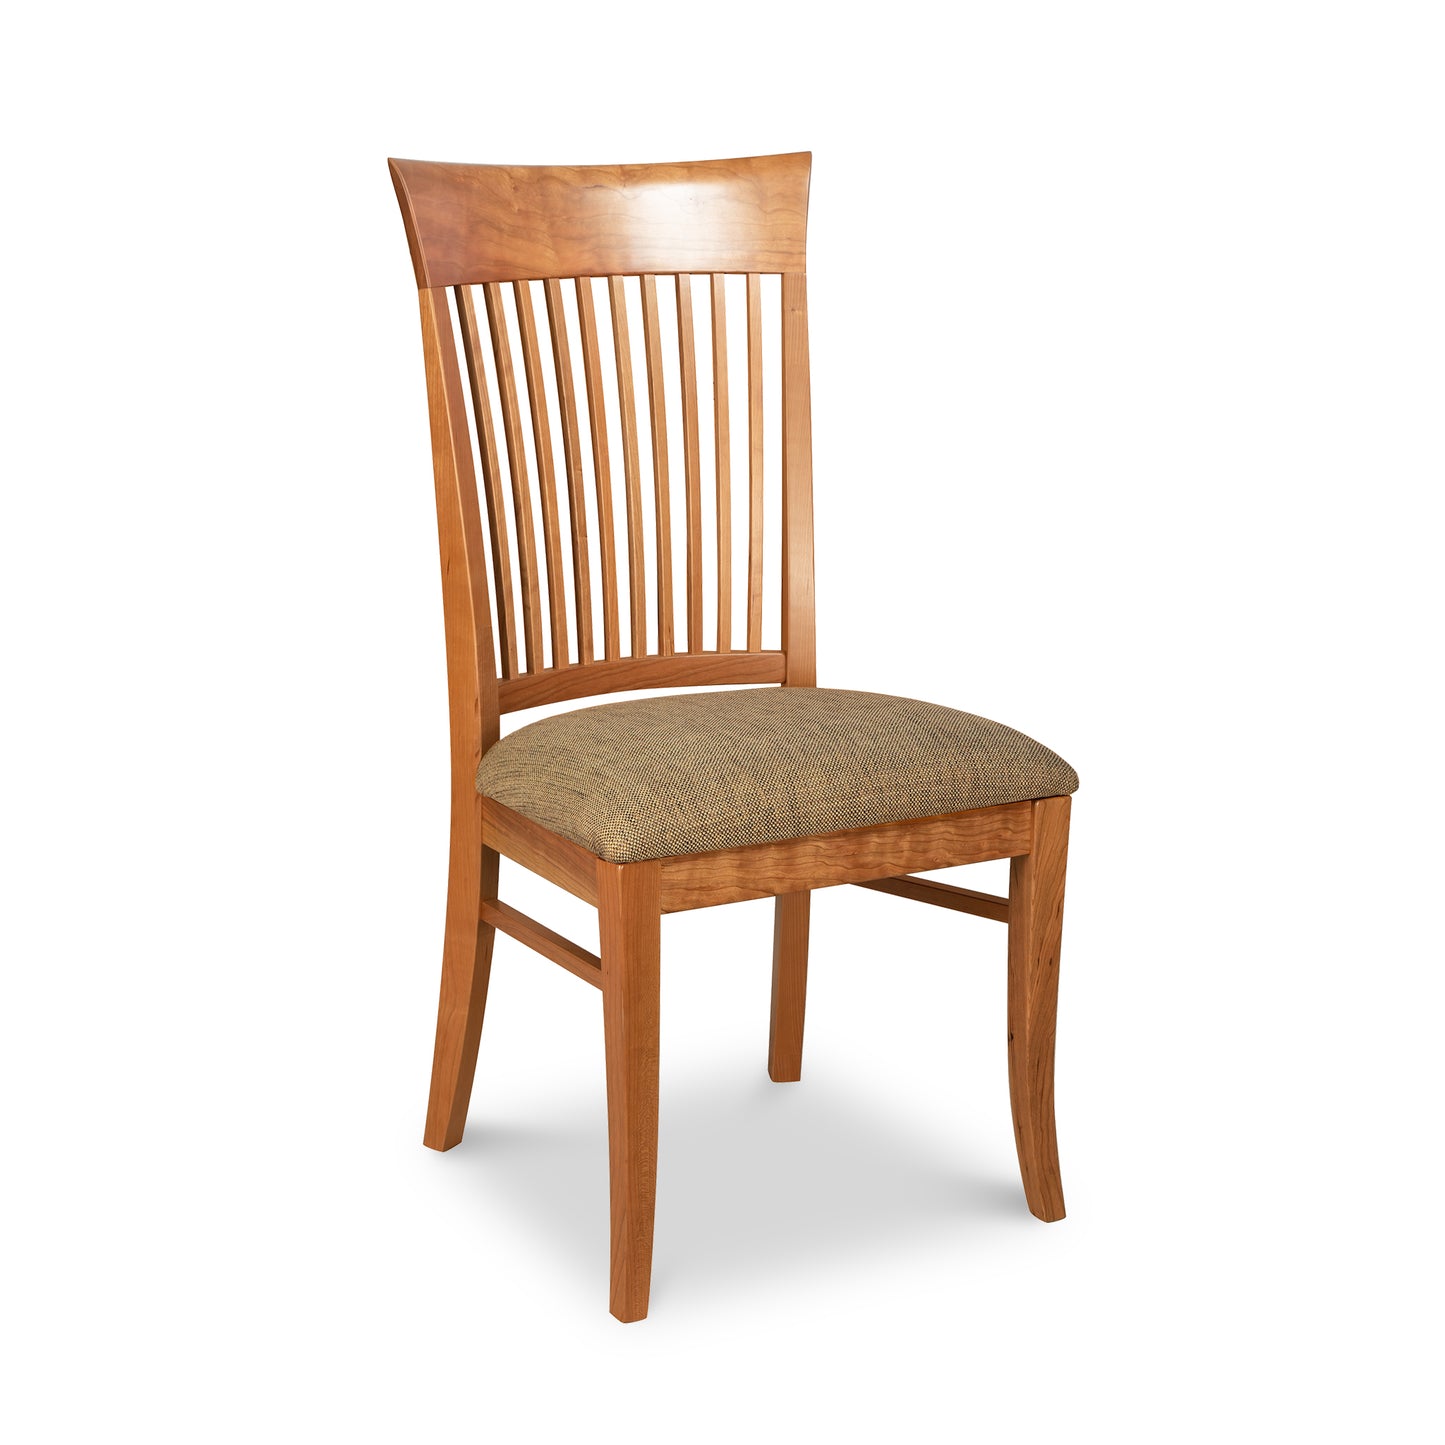 A handcrafted Vermont Woods Studios Contemporary Shaker chair with a tall, slatted back and a padded seat cushion in beige fabric, isolated on a white background.